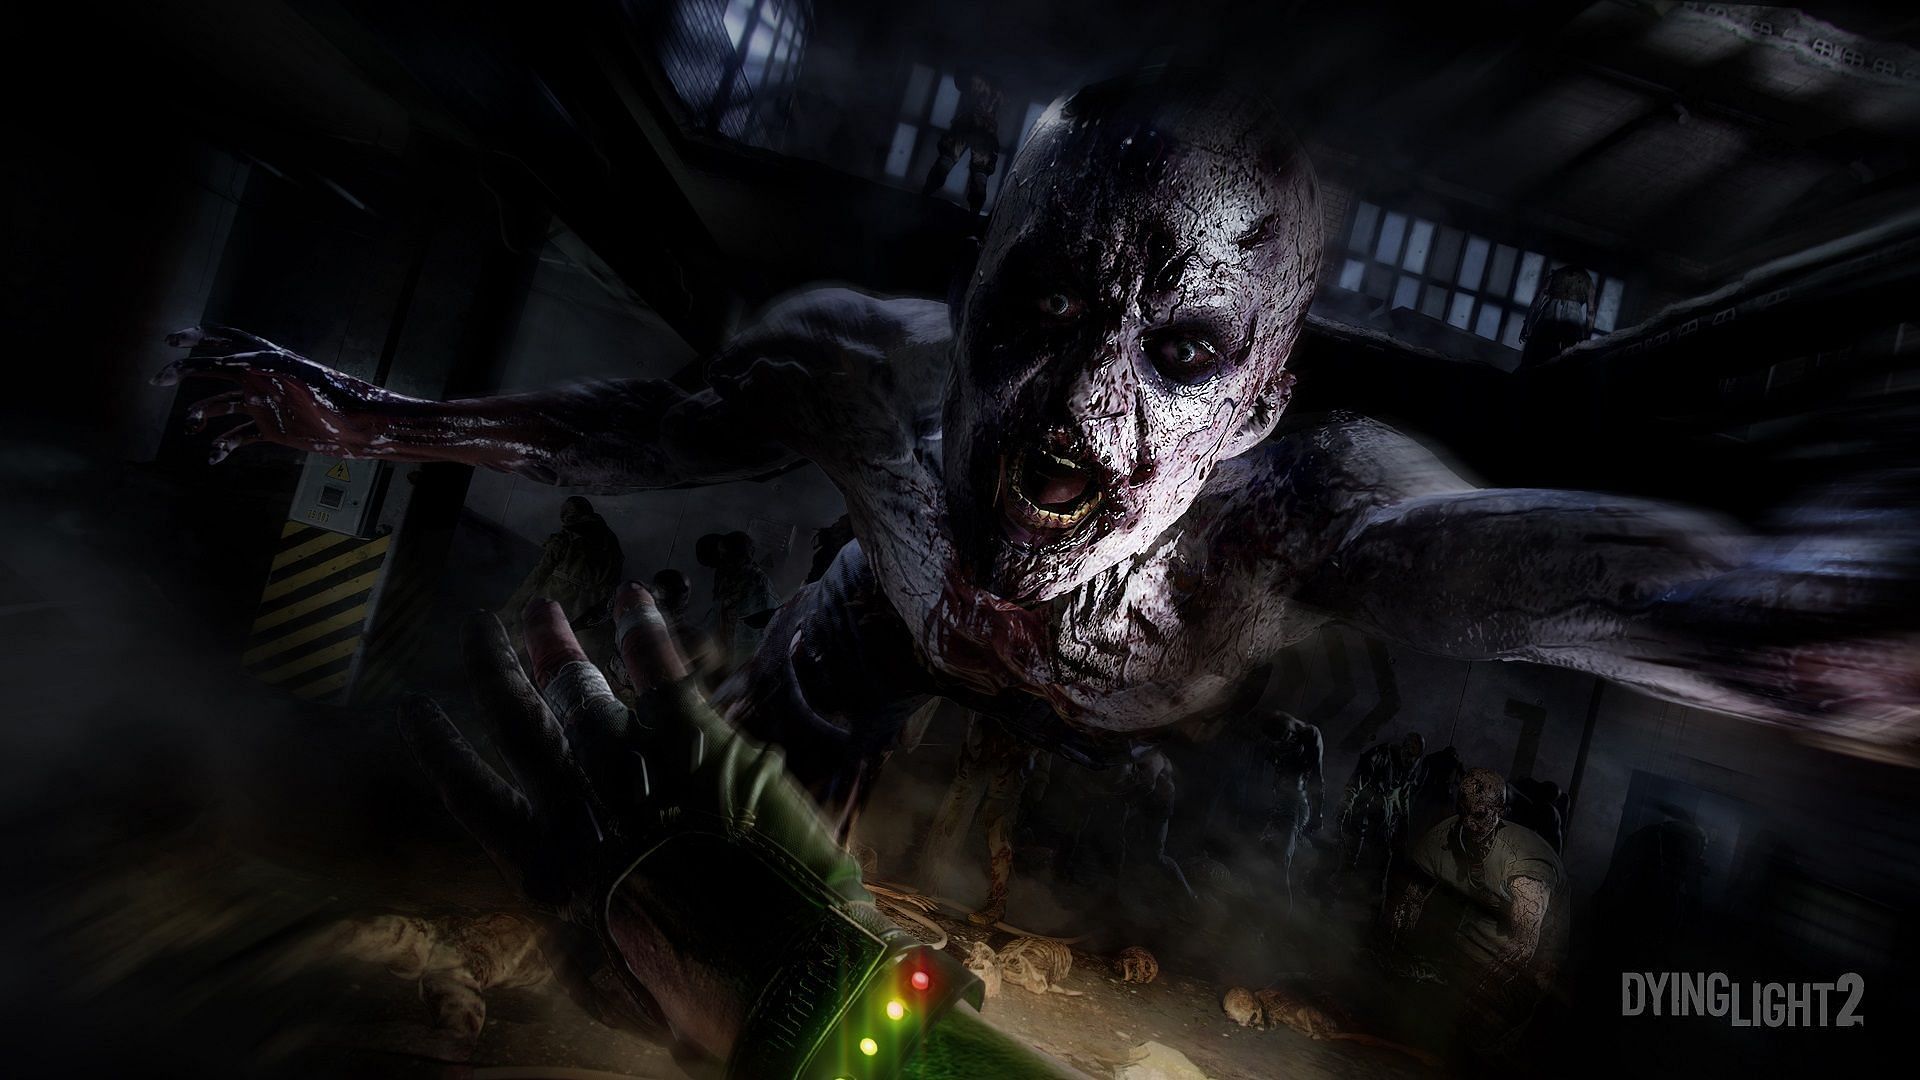 Dying Light 2 Stay Human - Meet the monsters confirmed so far